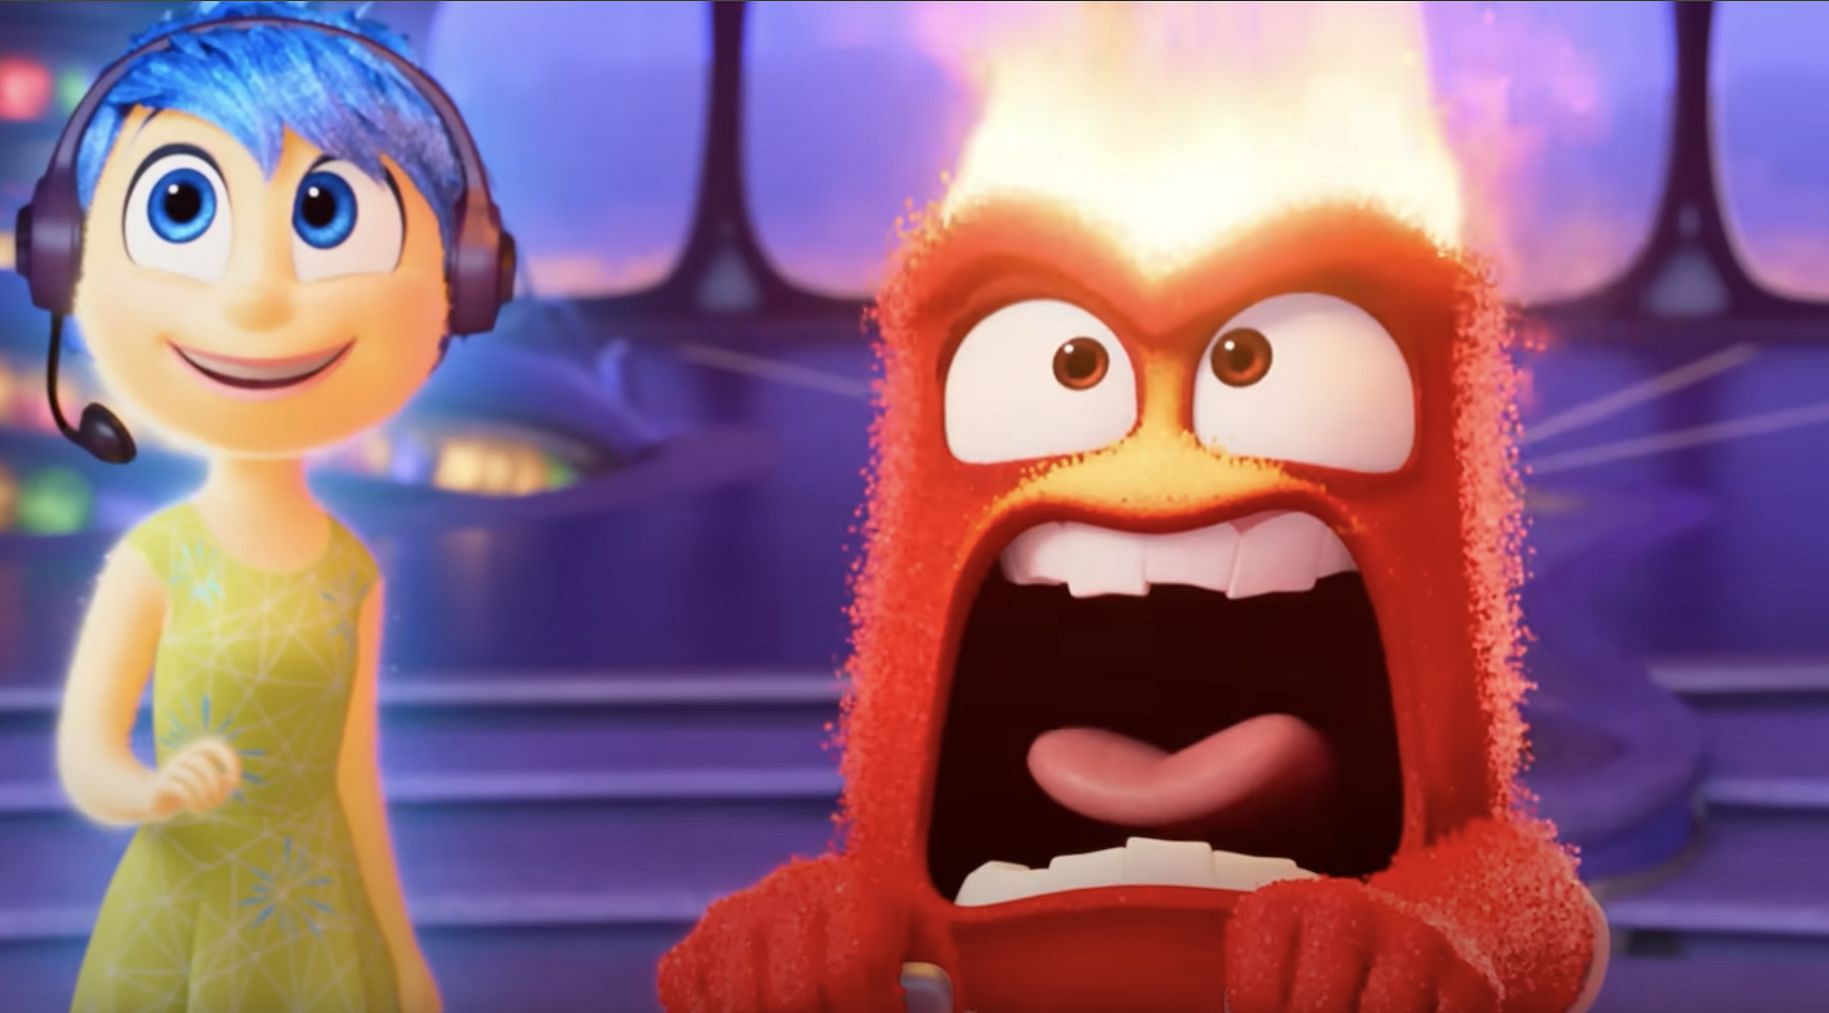 A still from Inside Out 2 (Image via Pixar)